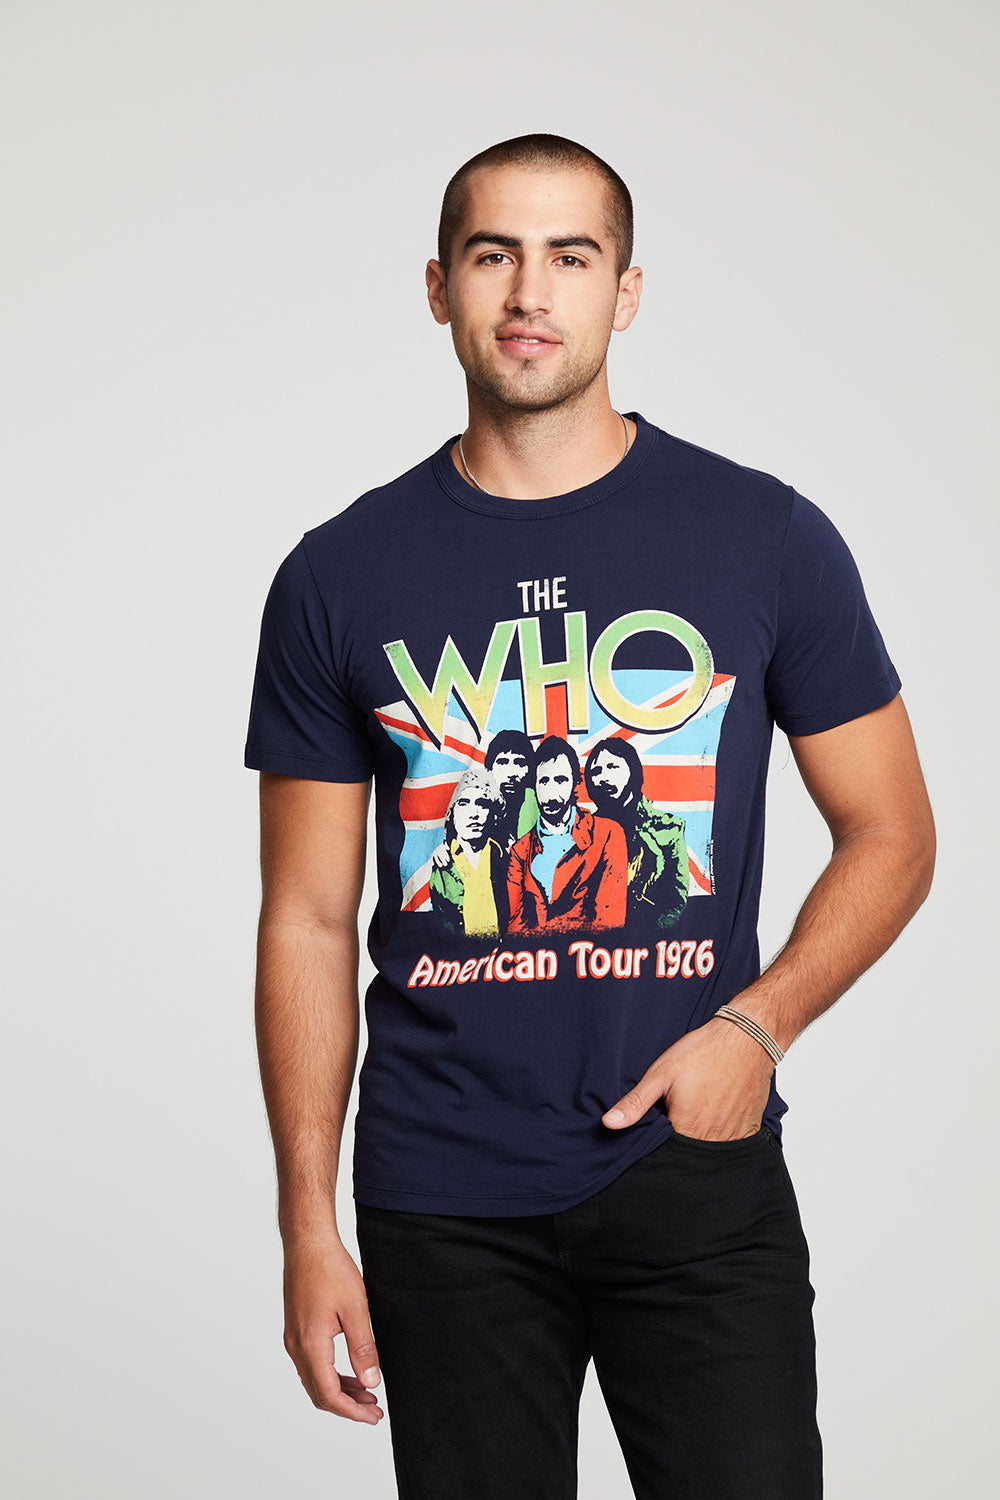 The Who American Tour MENS chaserbrand